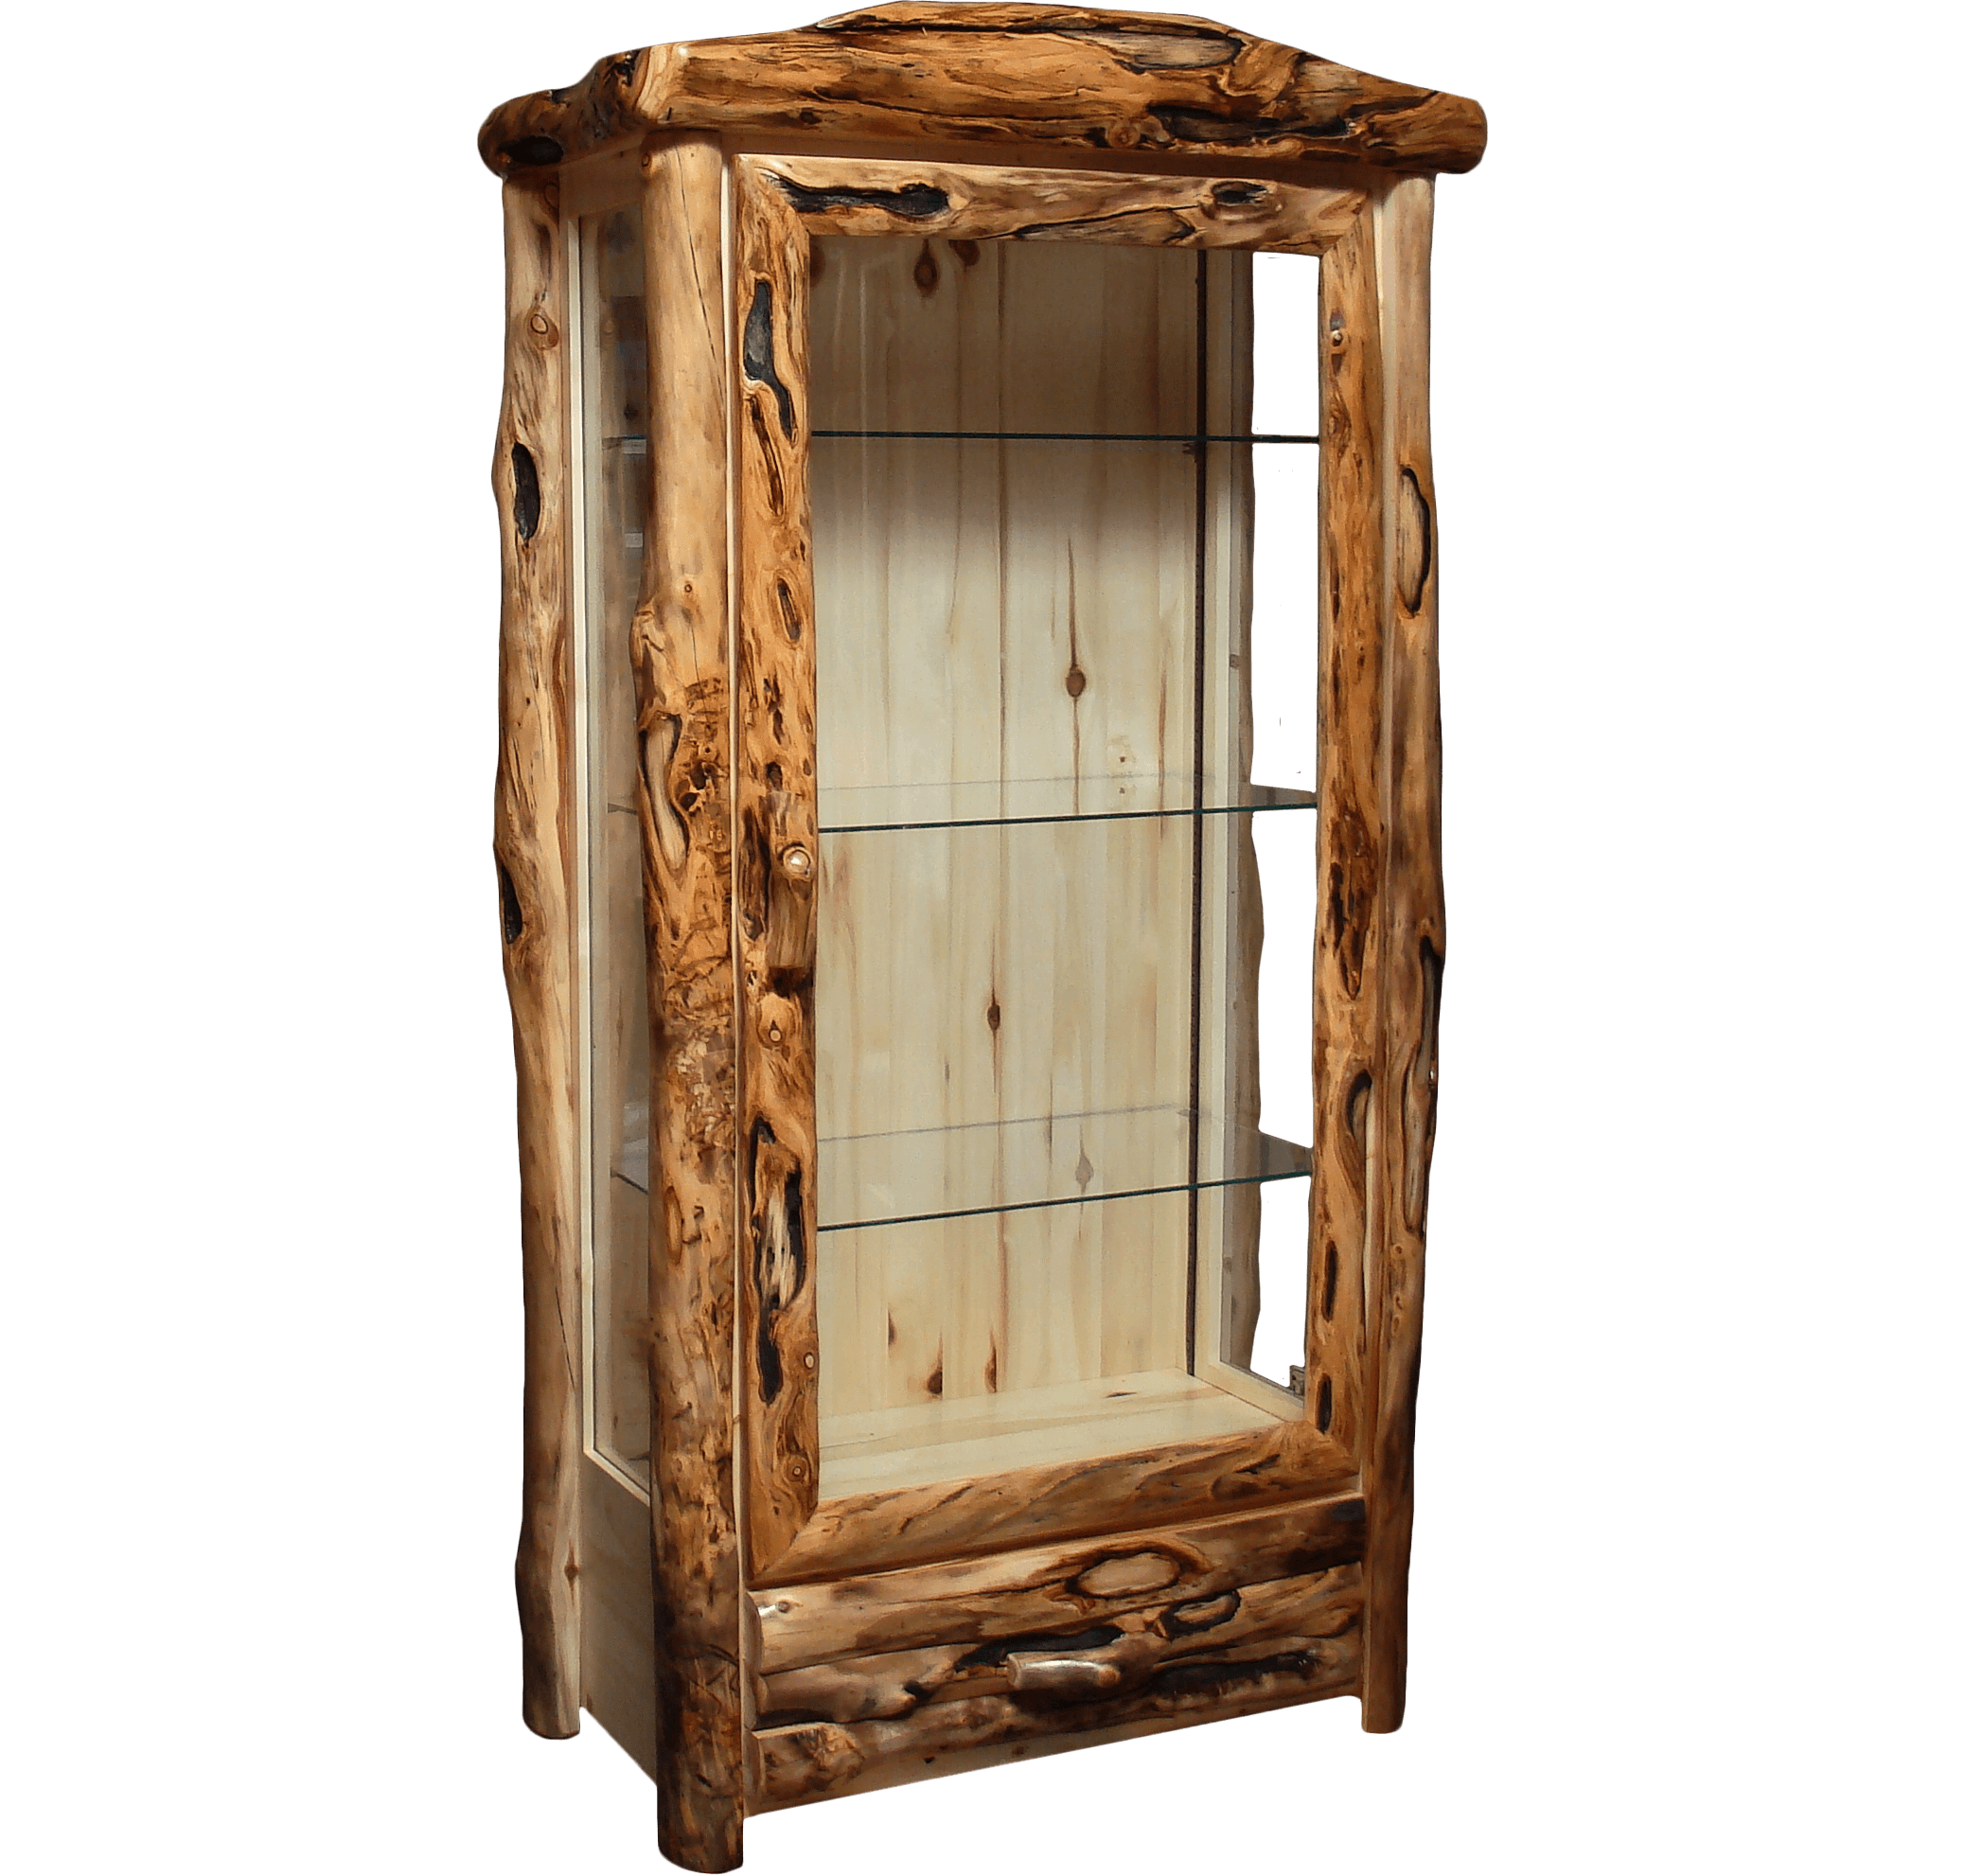 Curio Cabinet Download PNG Image High Quality PNG Image